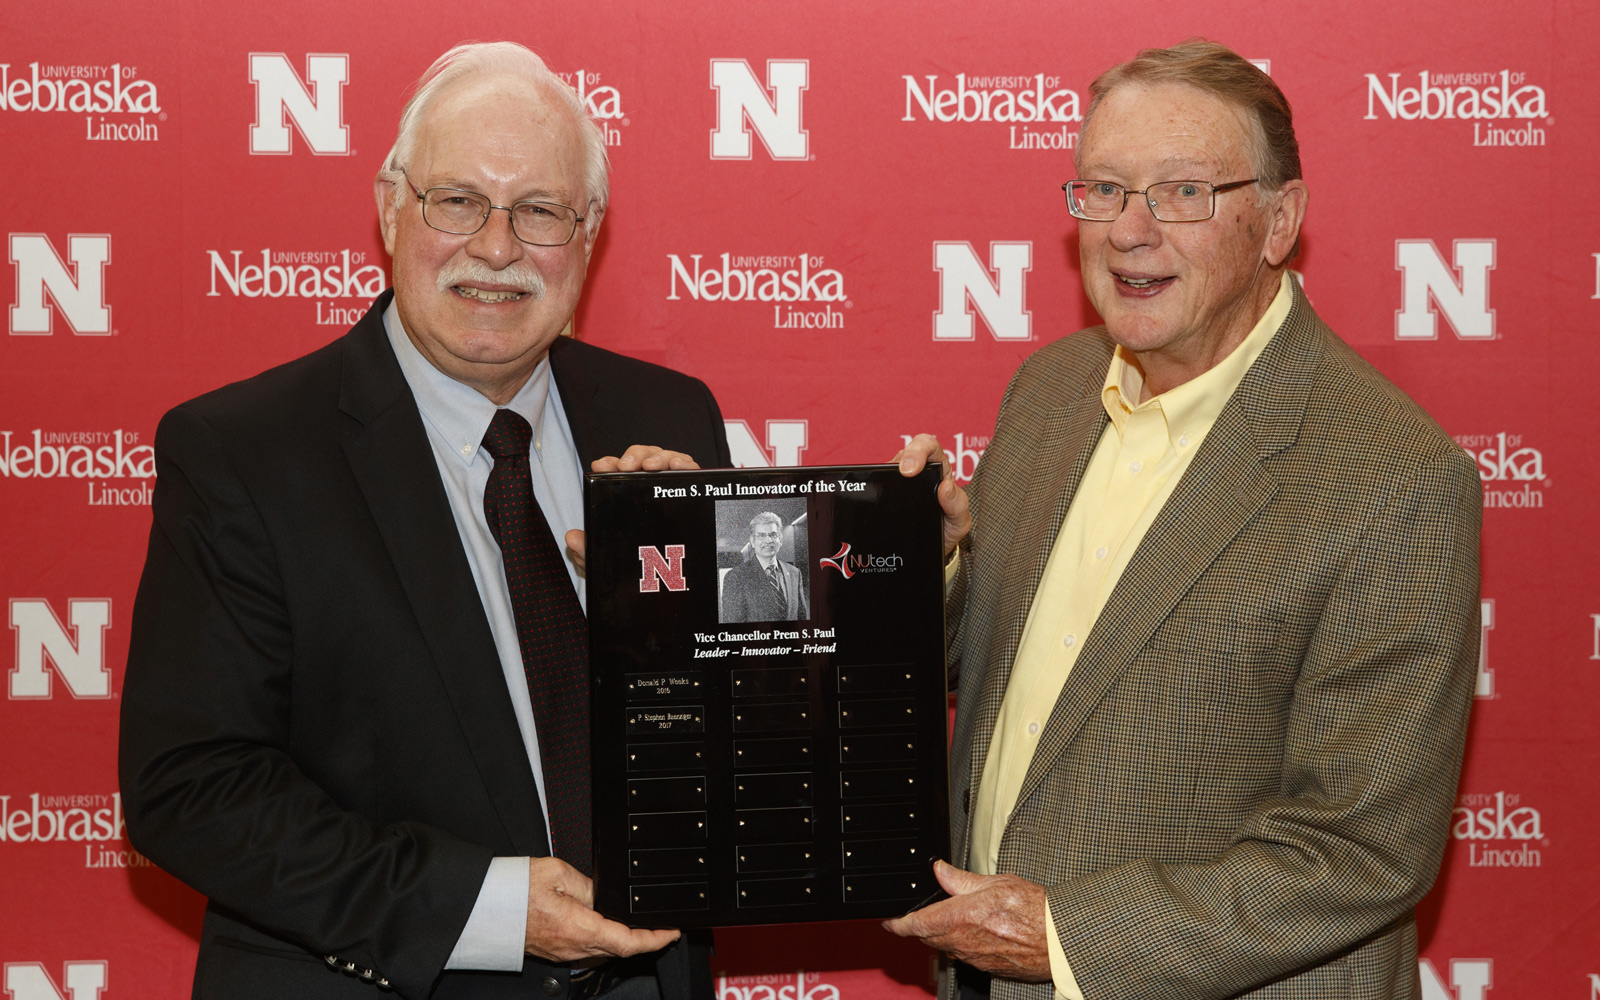 P. Stephen Baenziger (left), professor of agronomy and horticulture, was presented with the Prem S. Paul Innovator of the Year award during the NUTech Ventures 2017 Innovator Celebration.